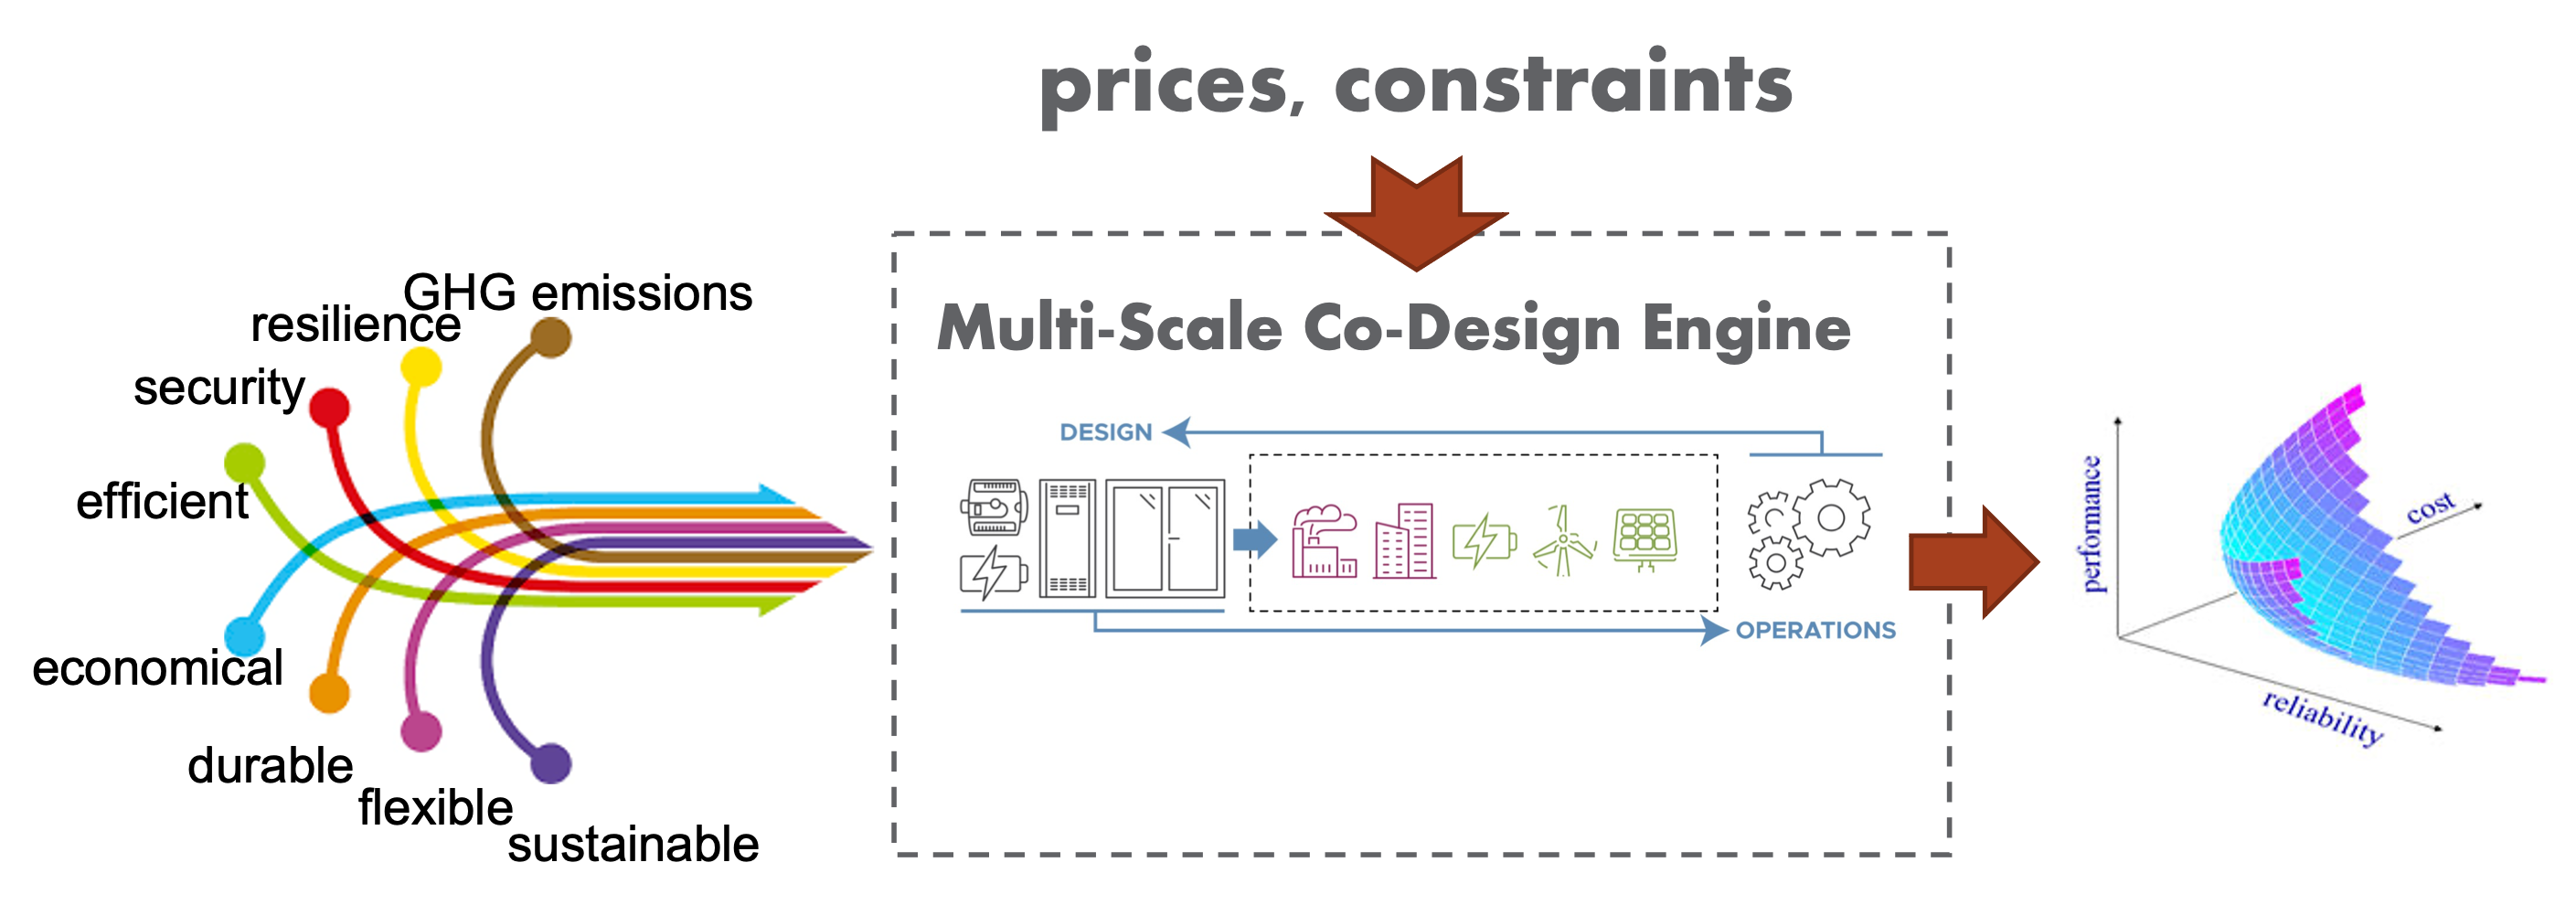 an illustration to represent the multi-scale, co-design engine